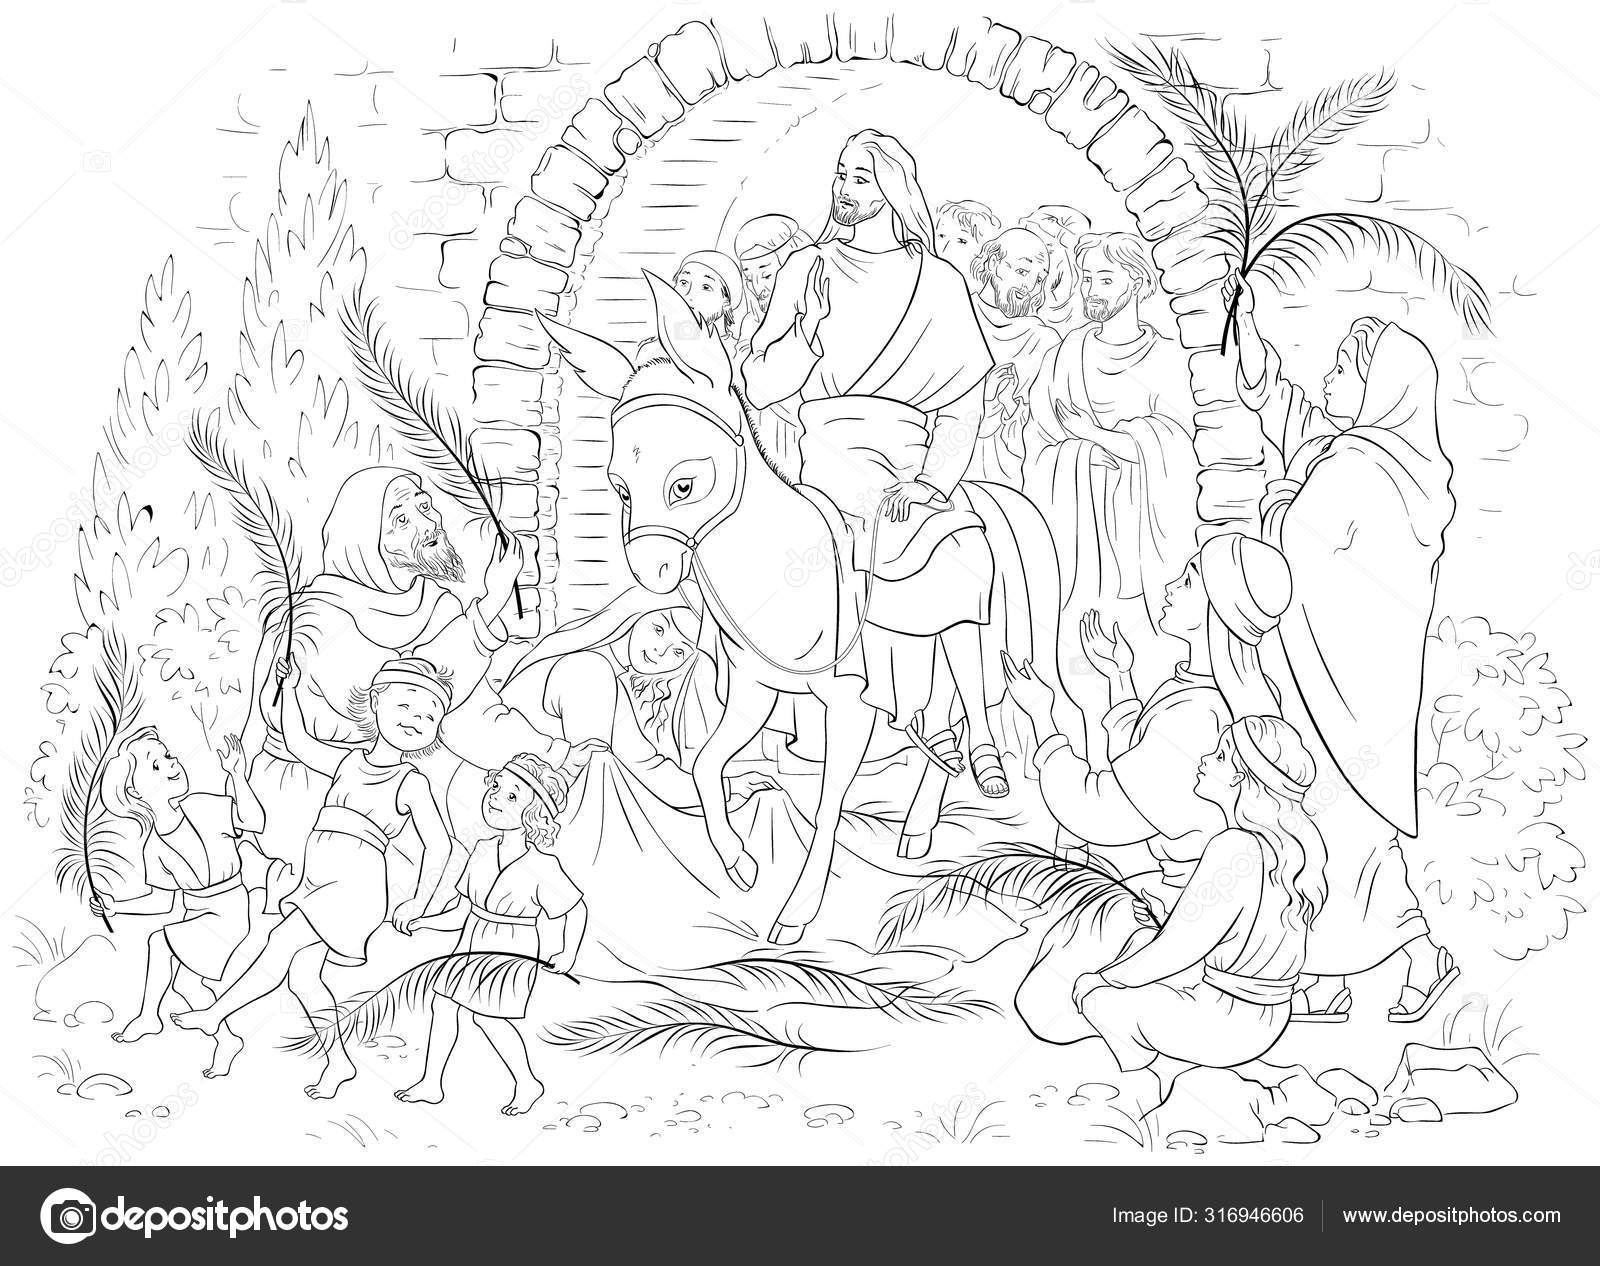 Entry our lord jerusalem palm sunday coloring page jesus christ stock vector by aura